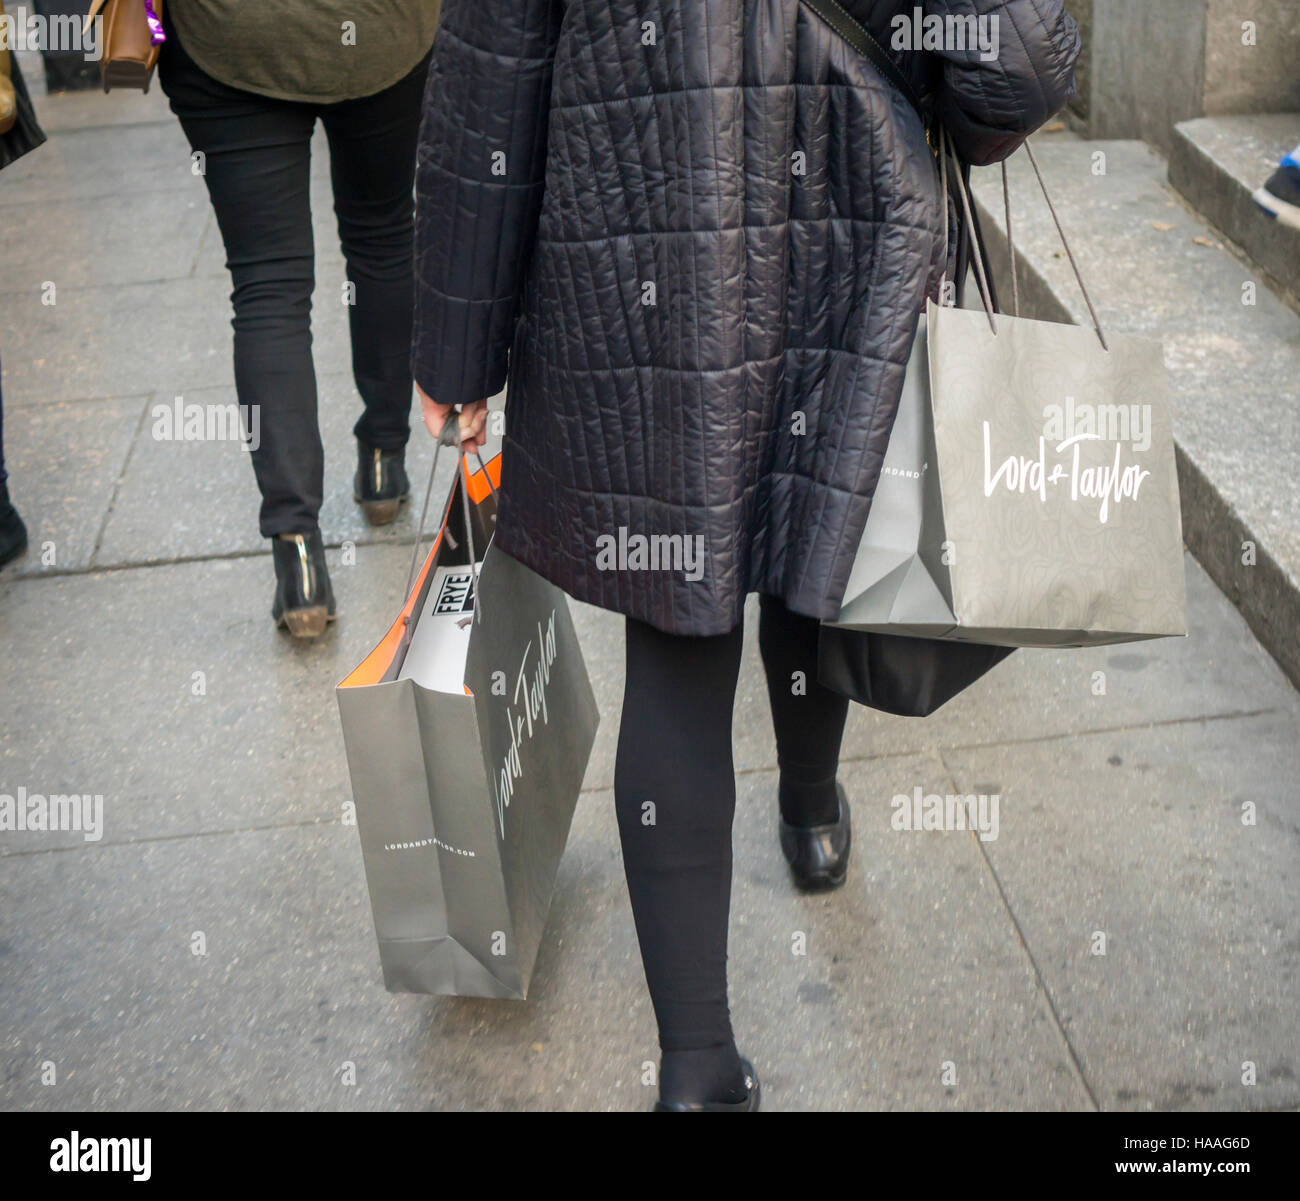 A shopper laden with her Lord & Taylor purchases in New York on Sunday, November 20, 2016. As shoppers turn to online shopping and stores expand their opening hours into Thanksgiving fewer shoppers flocking to the stores on Friday. (© Richard B. Levine) Stock Photo